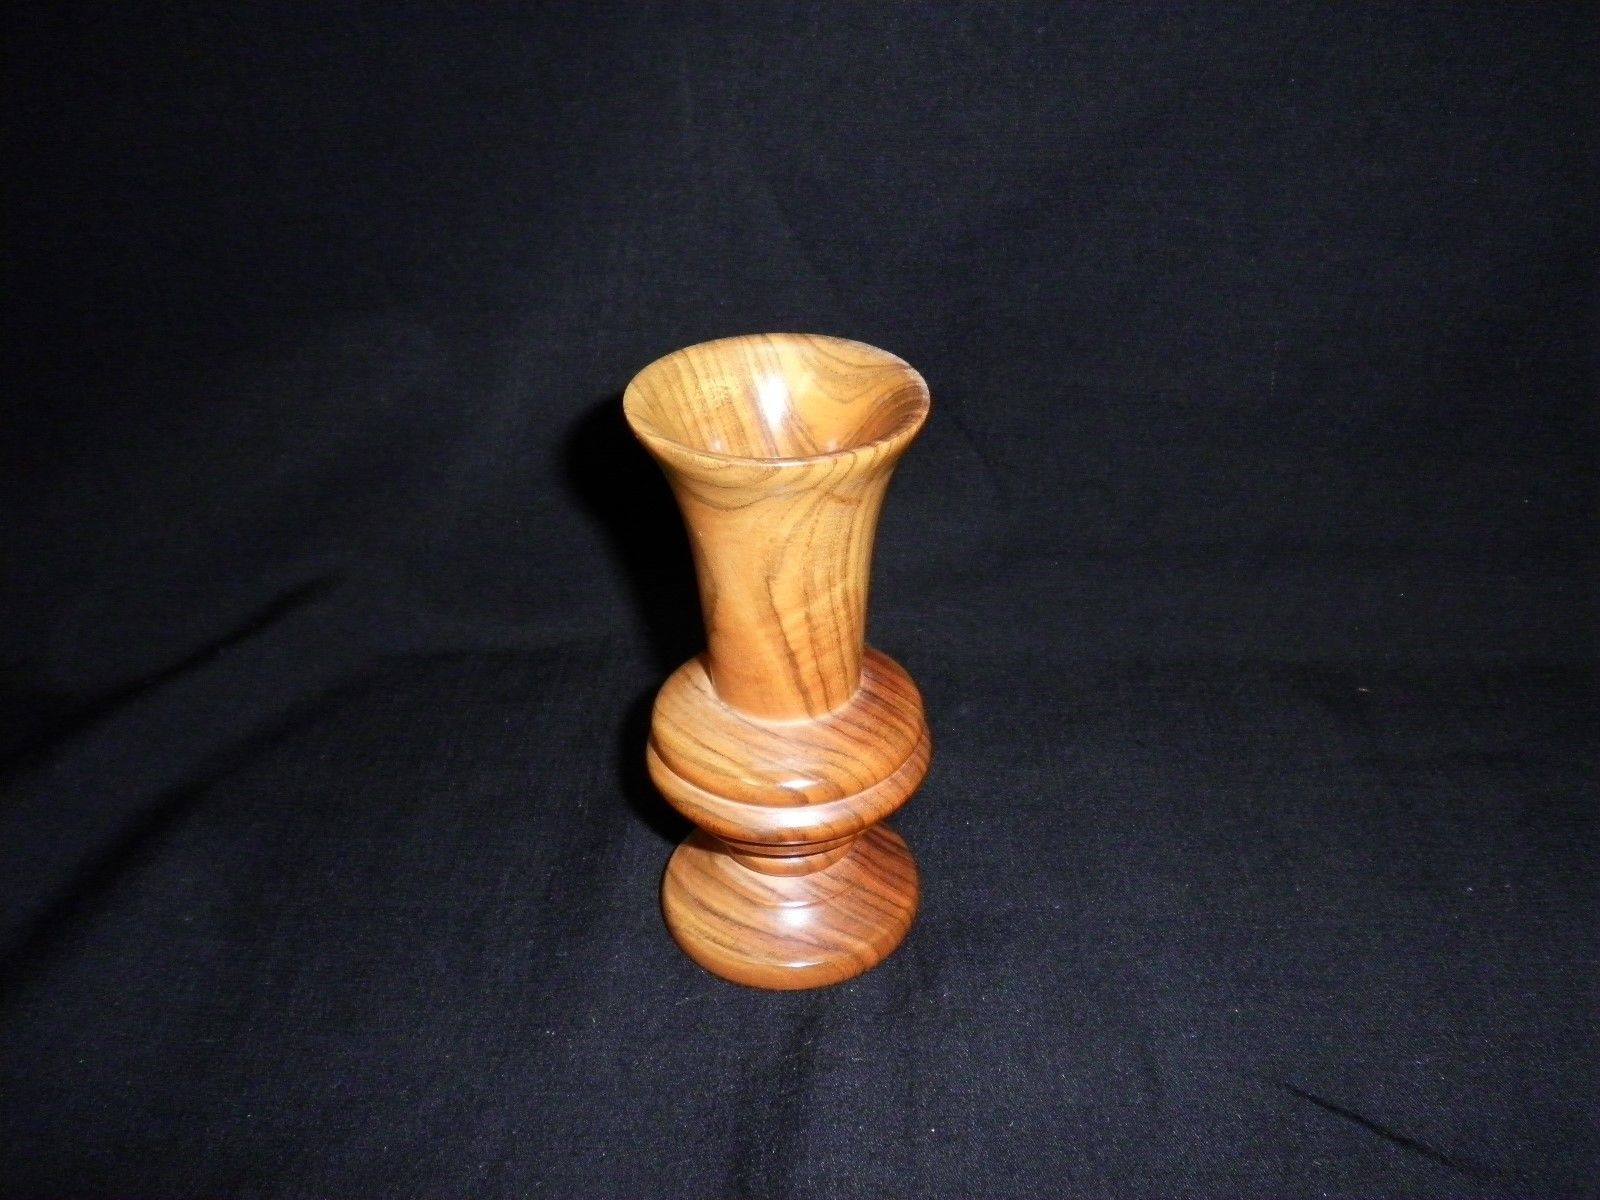 Burl Wood Vase Of Hand Crafted Olive Wood Wooden Vase Hand Made Turned Small Intended for Hand Crafted Olive Wood Wooden Vase Hand Made Turned Small Collectible 2 Of 6 Hand Crafted Olive Wood Wooden Vase